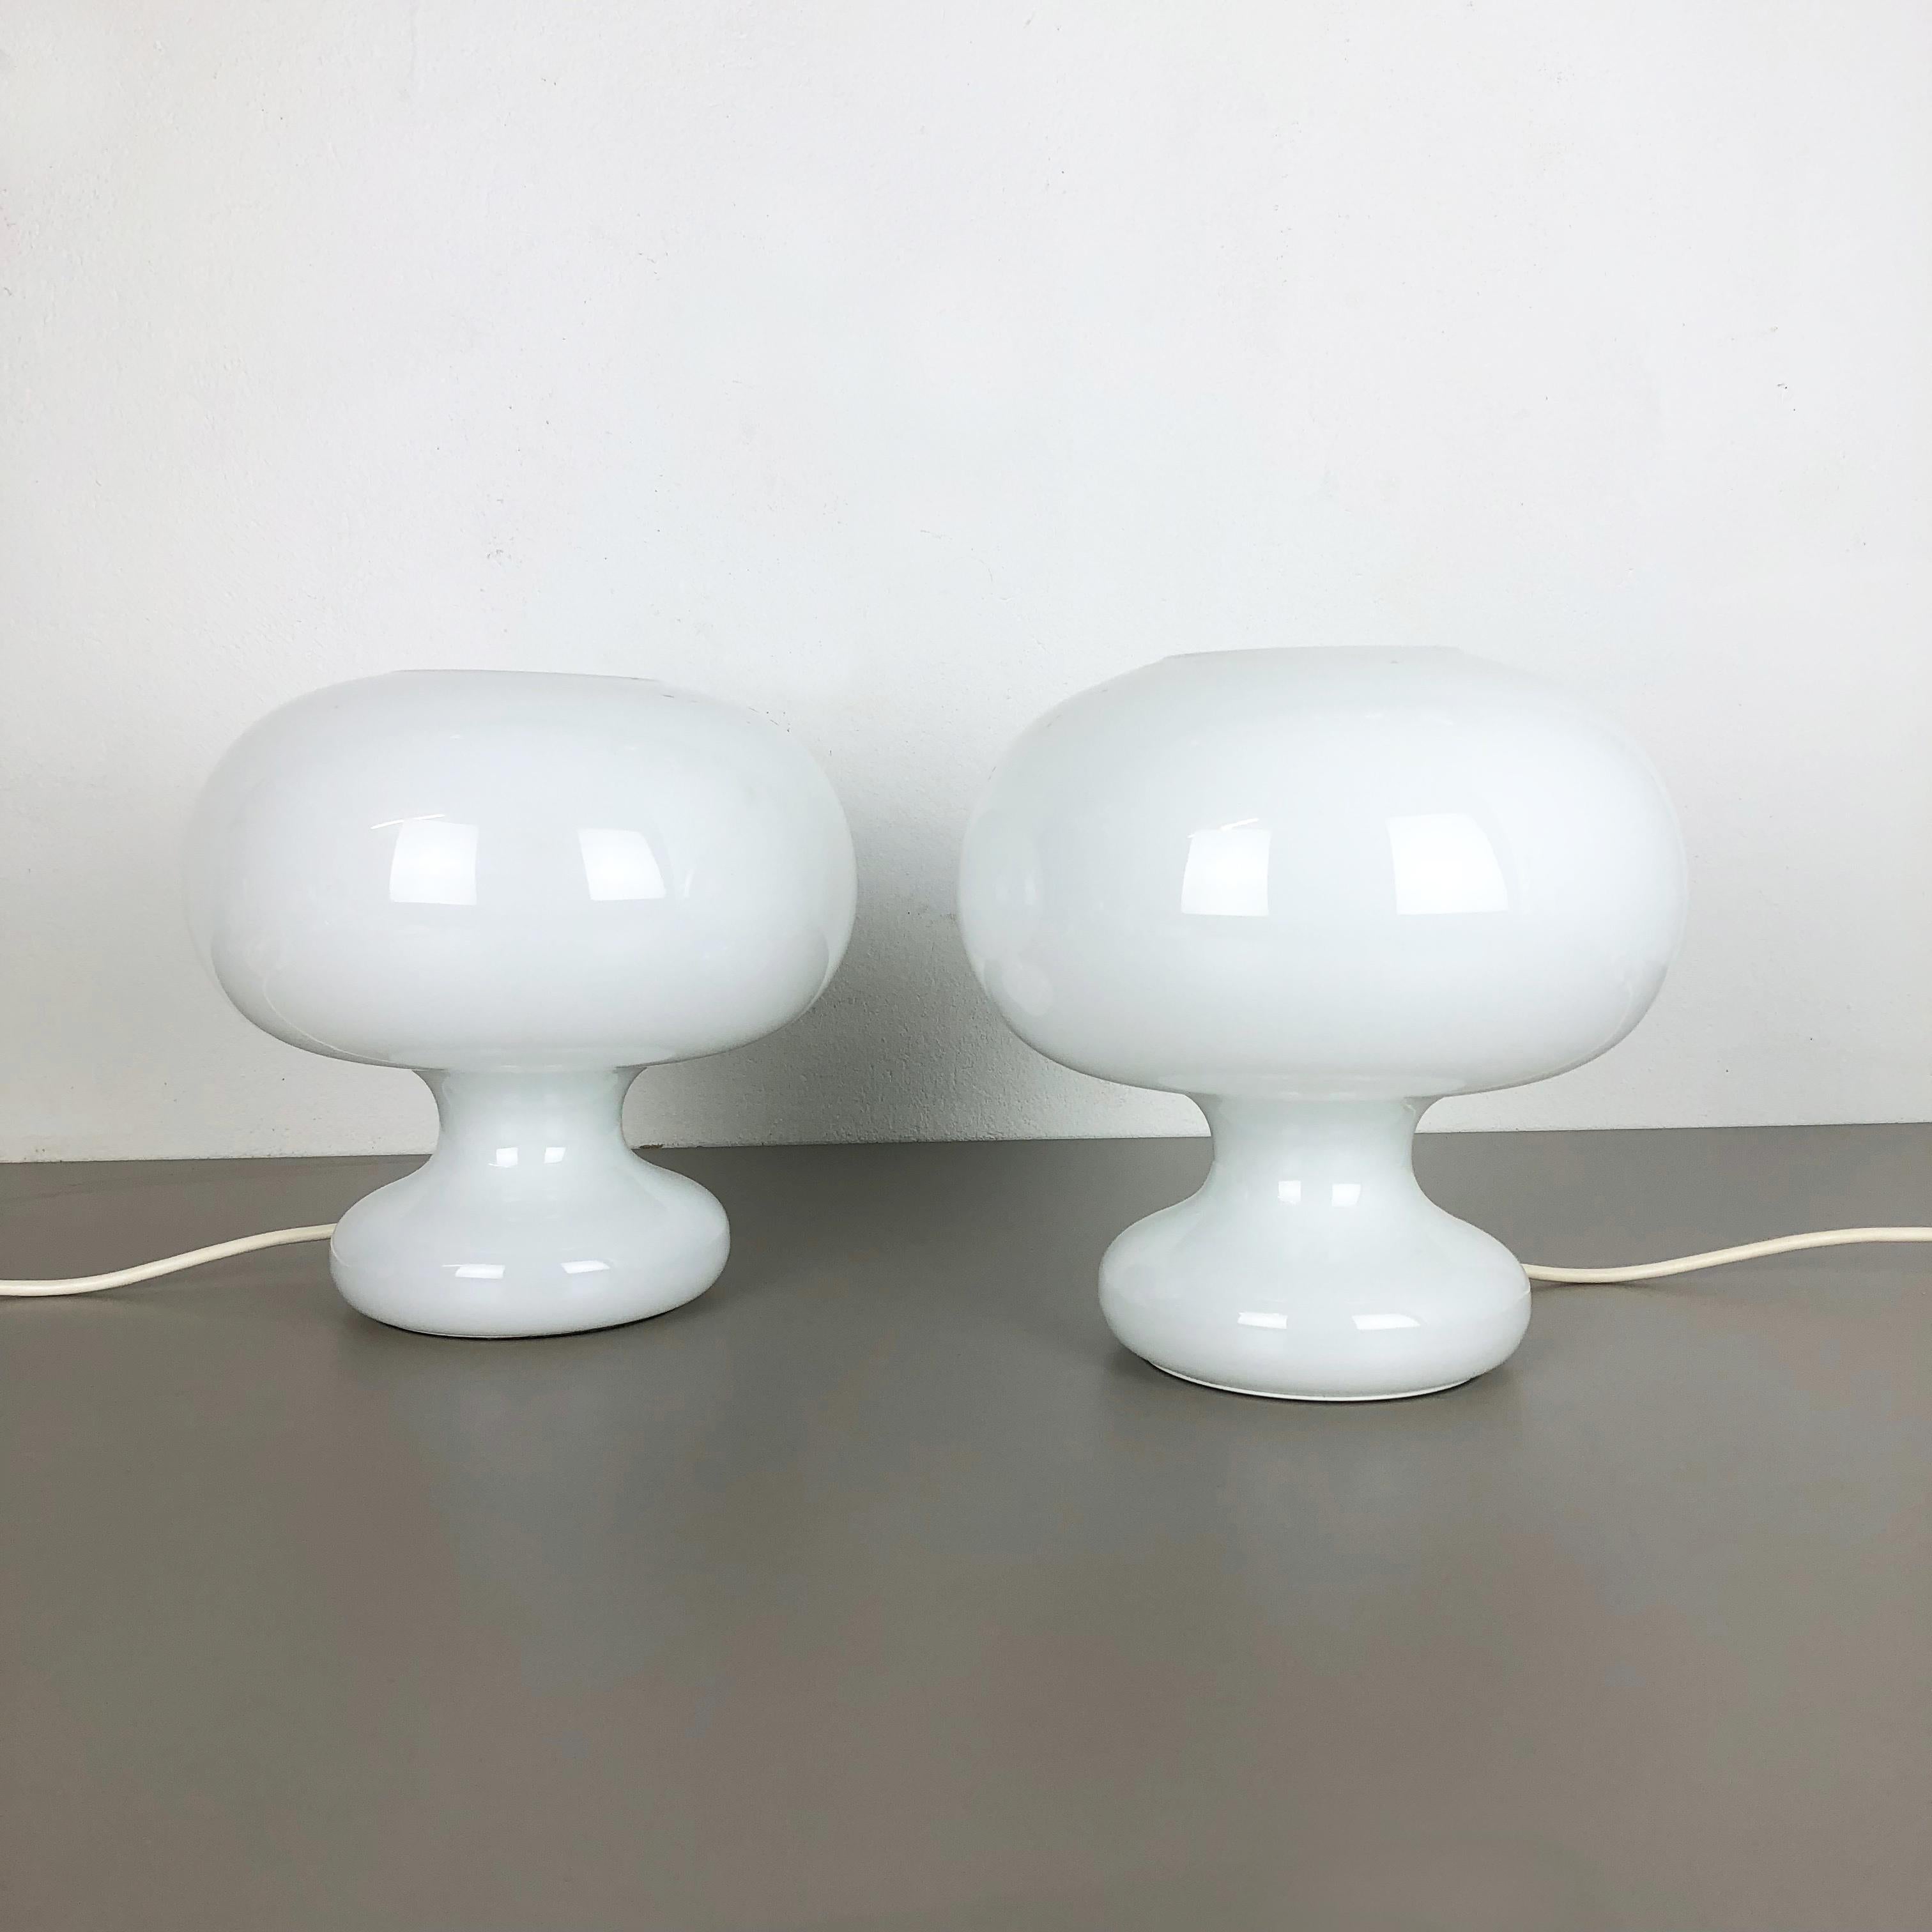 Article:

Mushroom desk lamp set of 2

Producer:

Cosack Lights, Germany

Age:

1970s


Description:

This original set of 2 vintage table lights made of high quality handblown glass was produced by German premium light producer